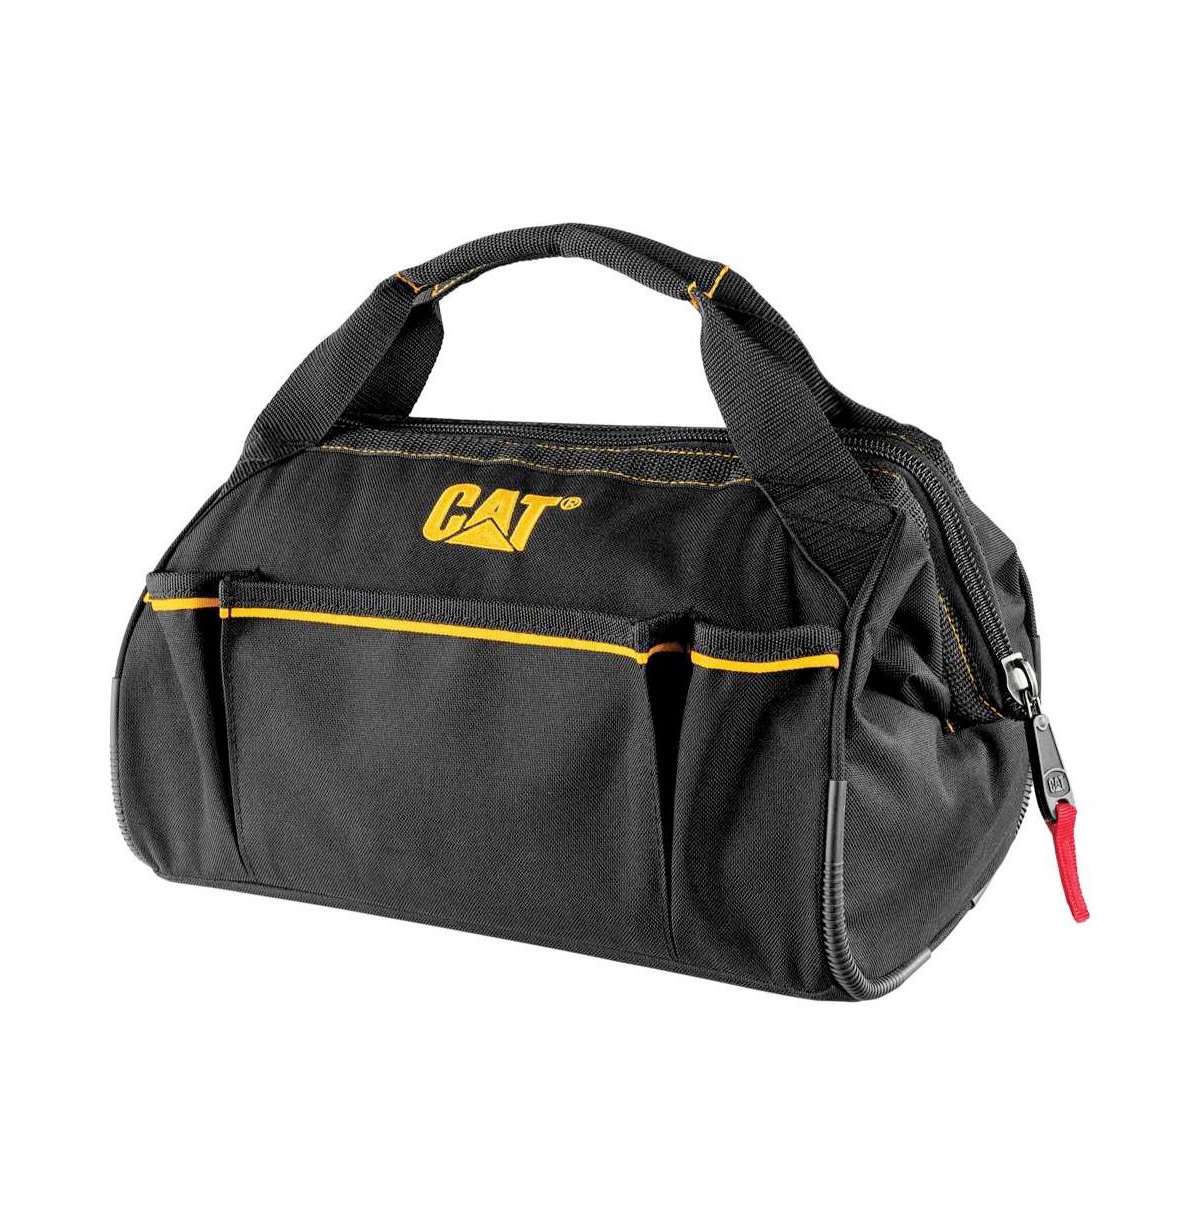 13 Inch Wide-Mouth Tool Bag with Pockets